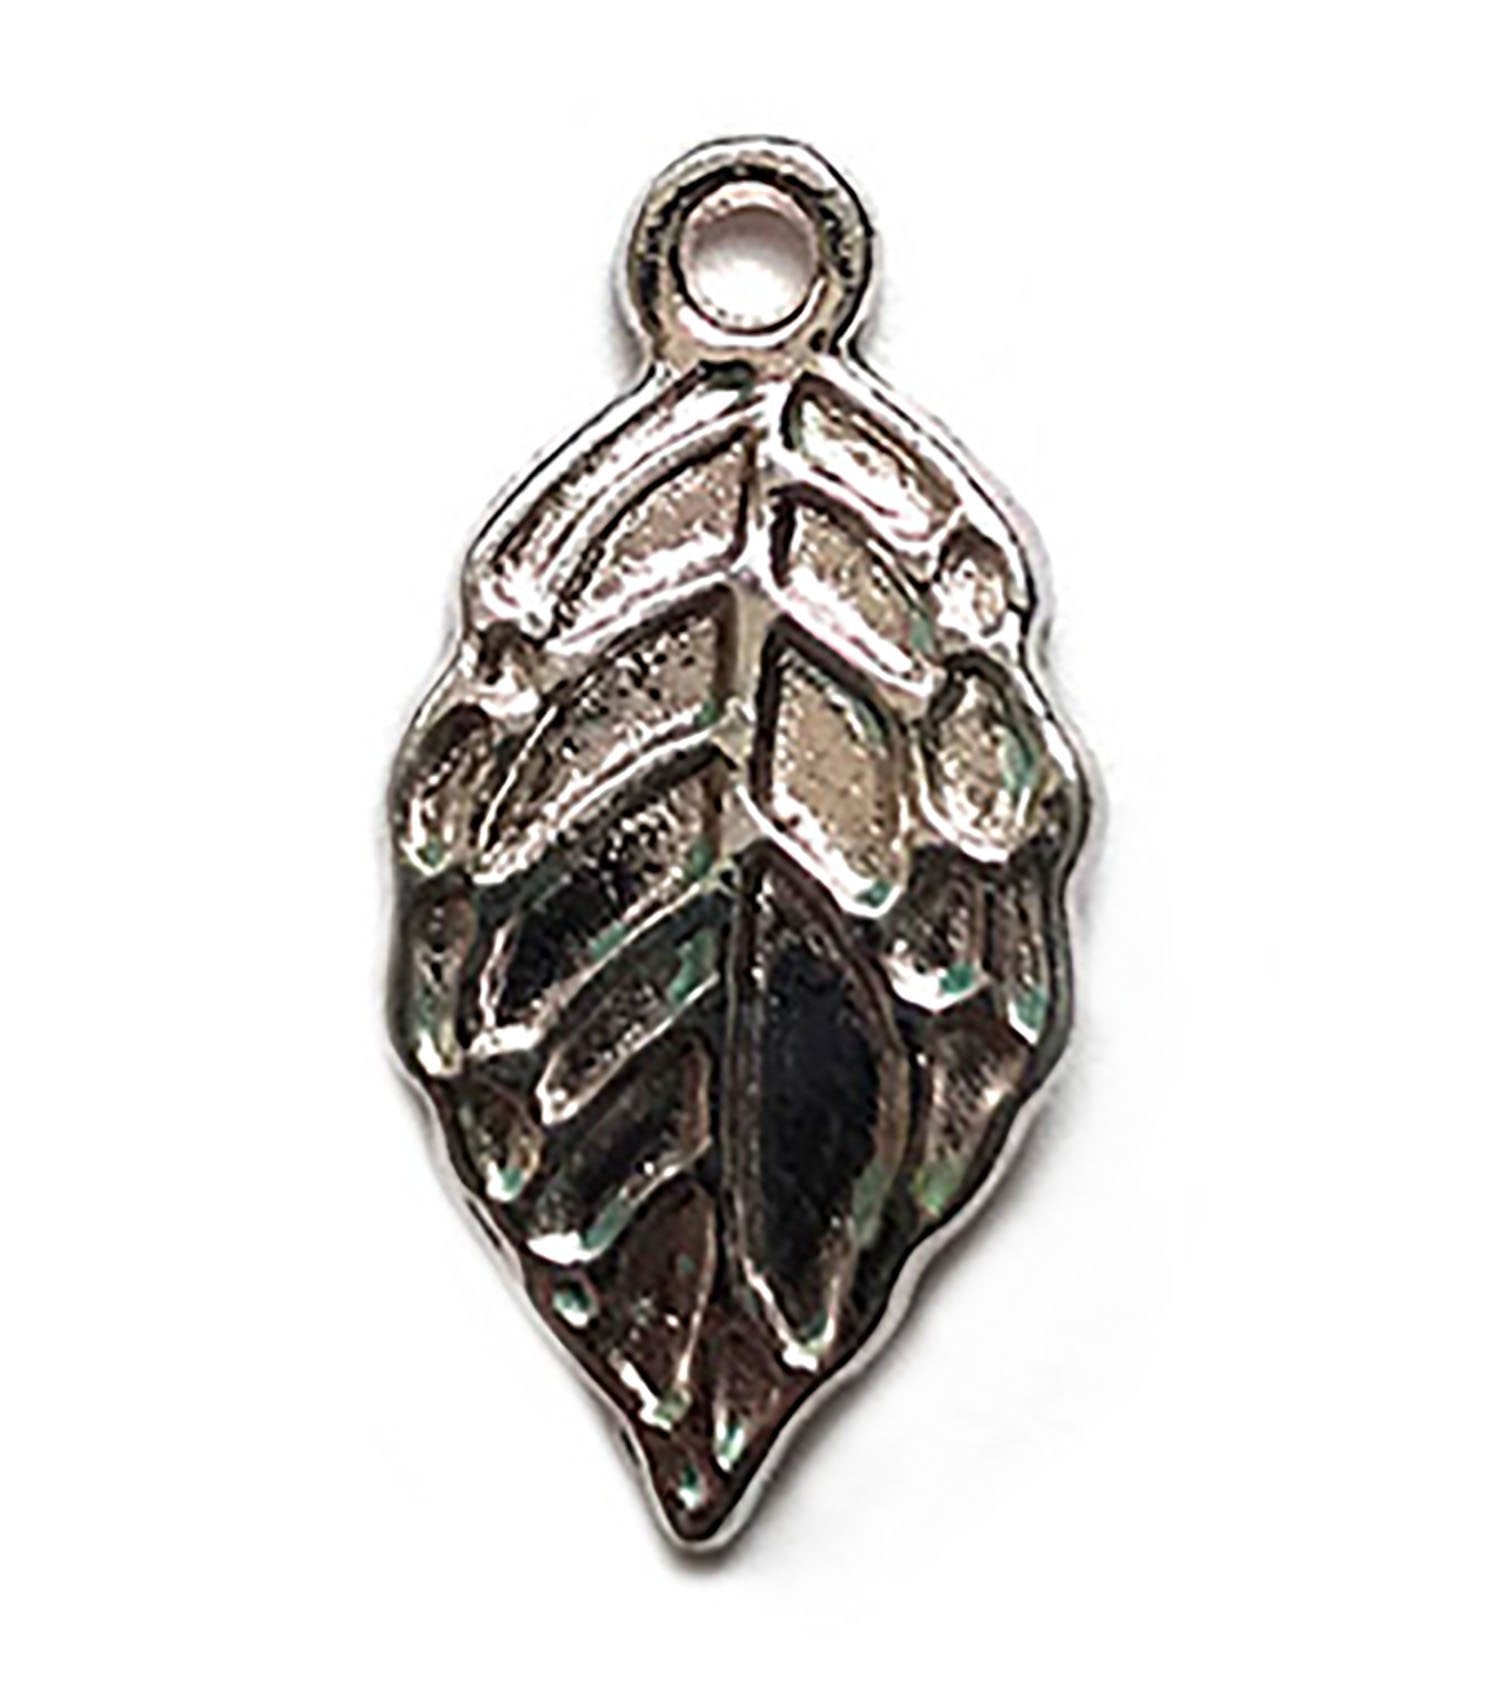 Leaf Charms for DIY Jewelry Making & Crafting